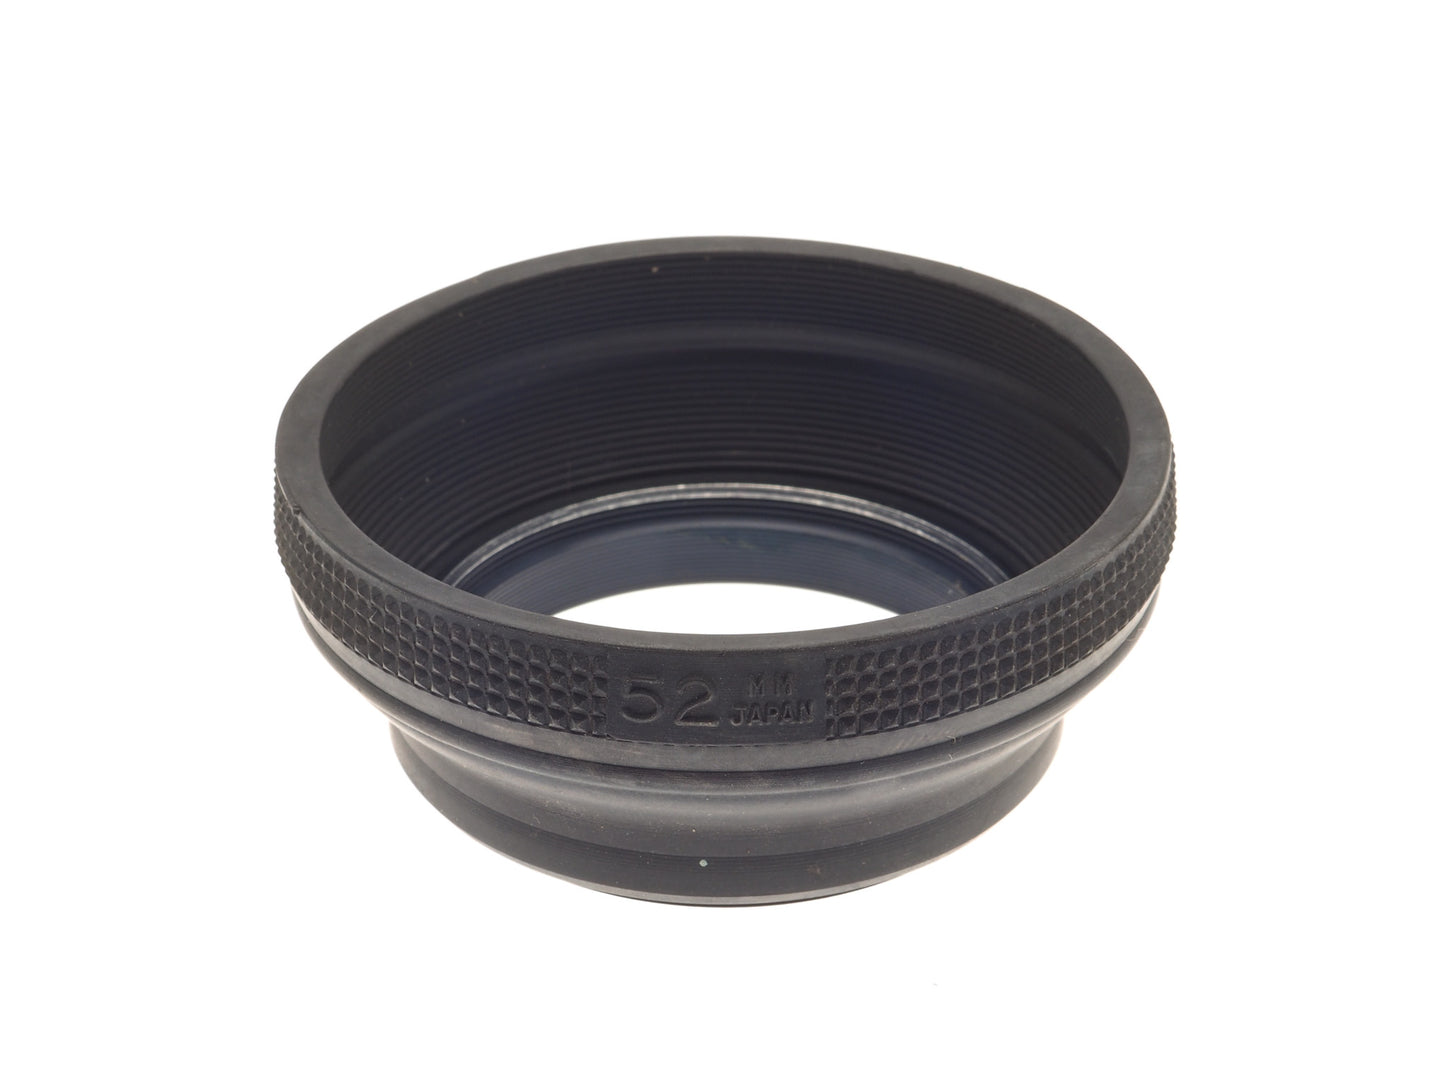 Generic 52mm Collapsible Lens Hood - Accessory